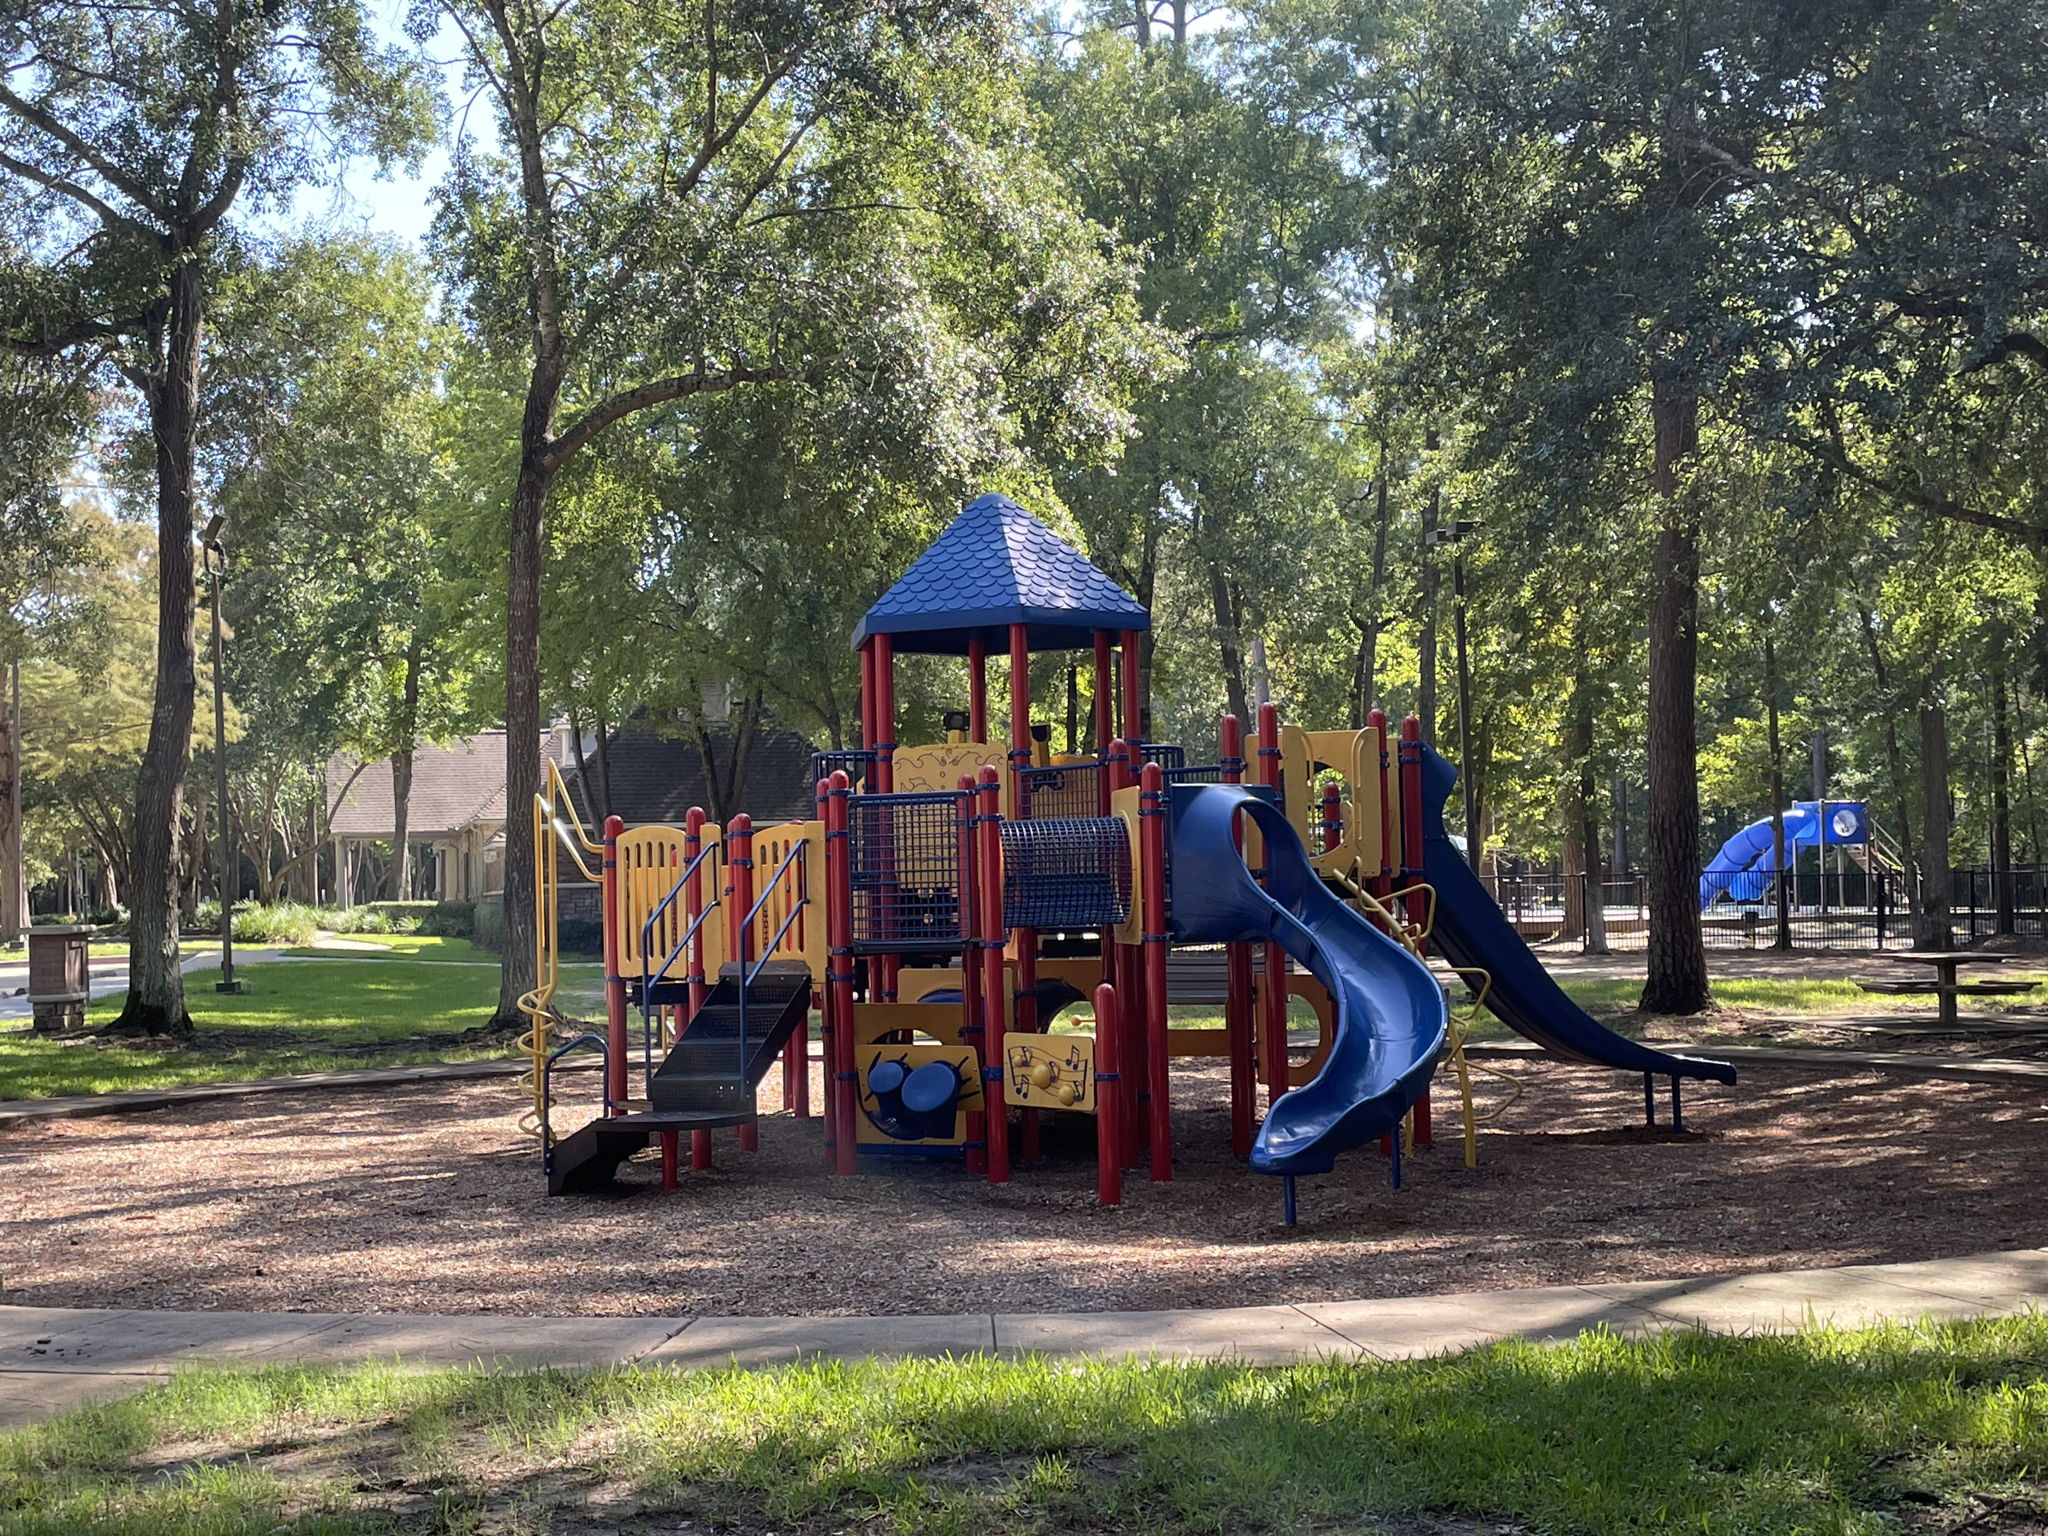 The Playground at the park next to the clubhouse.